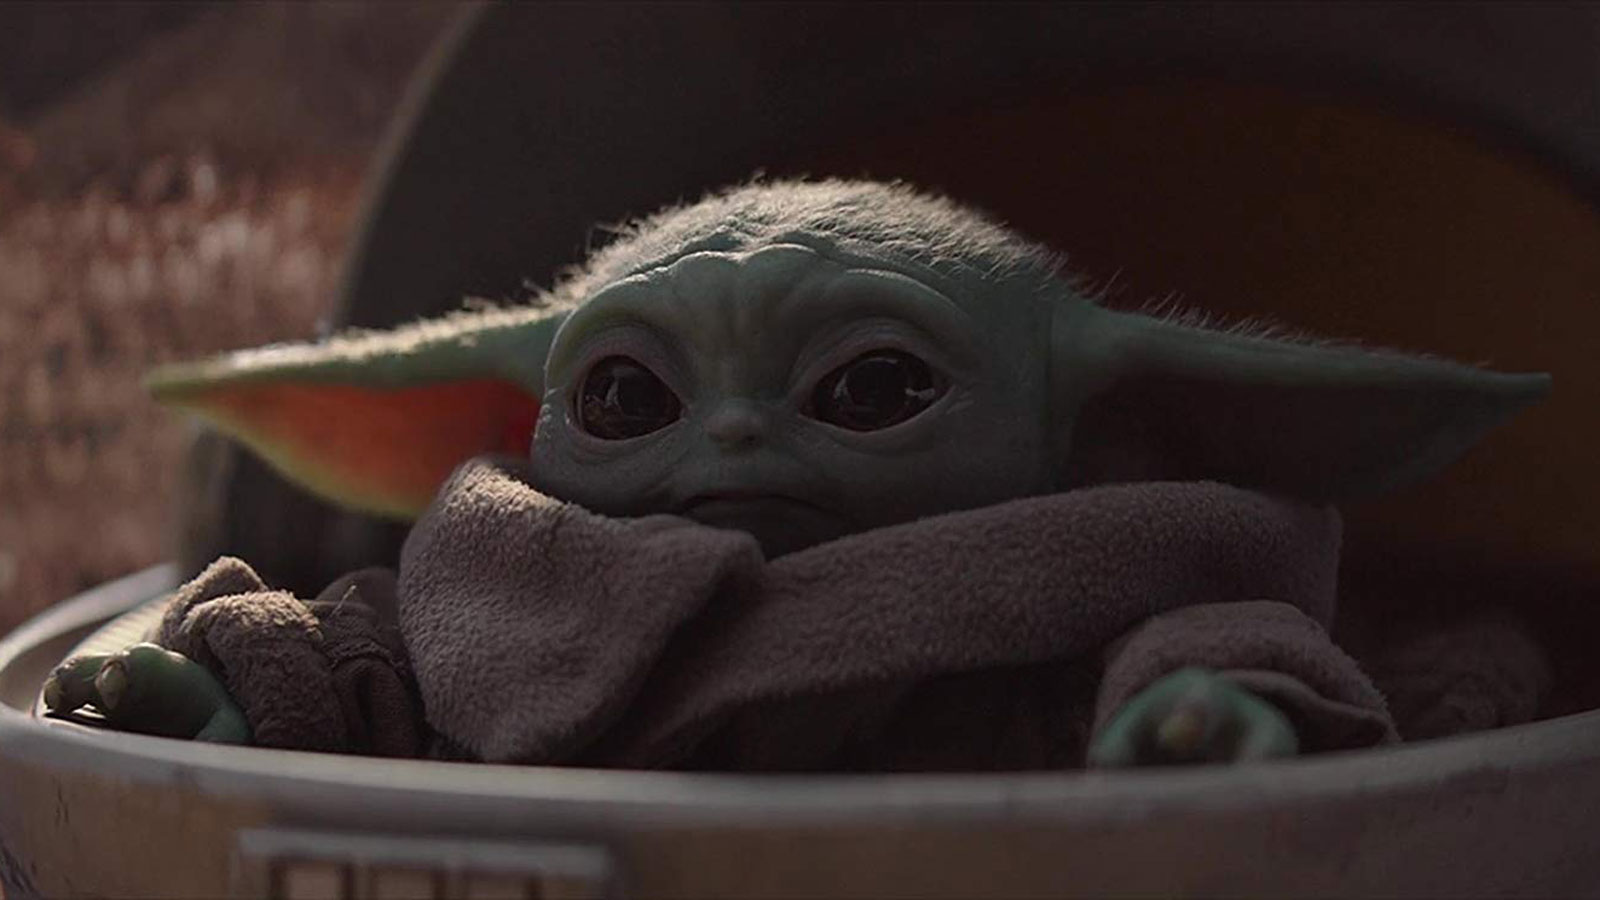 People Can T Stop Sharing Baby Yoda Memes And We Don T Want Them To Cnn